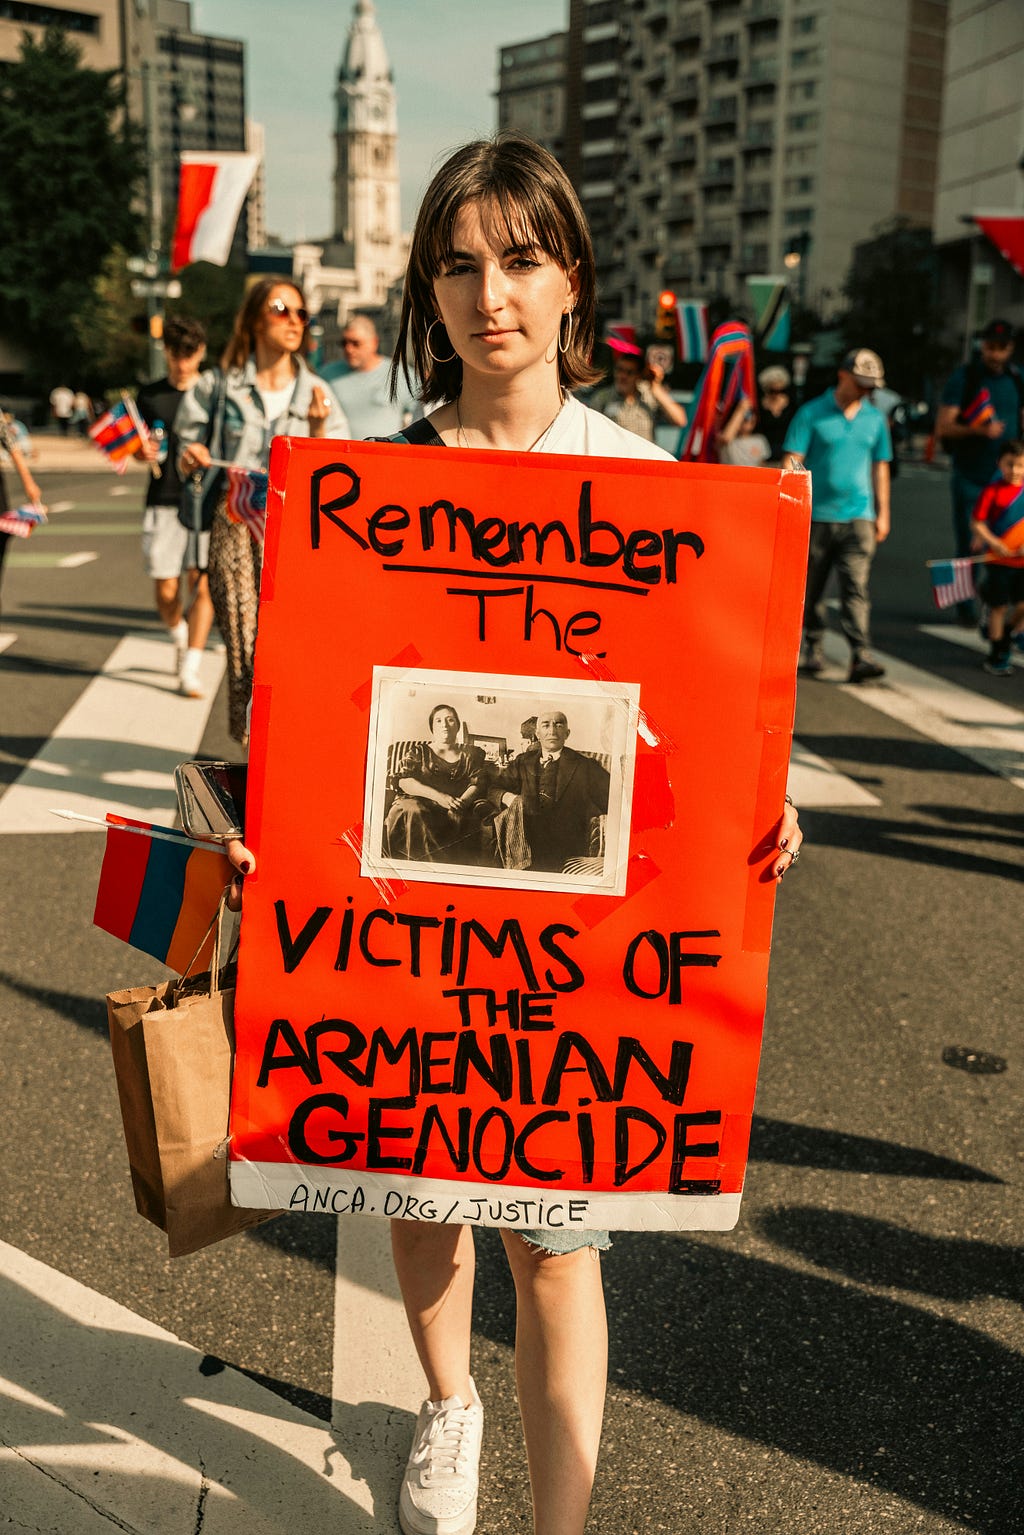 A woman holding a sign at a protest with the words “Remember the Victims of the Armenian Genocide”, a photograph in the centre depicts an older man and woman who are presumably victims of the genocide